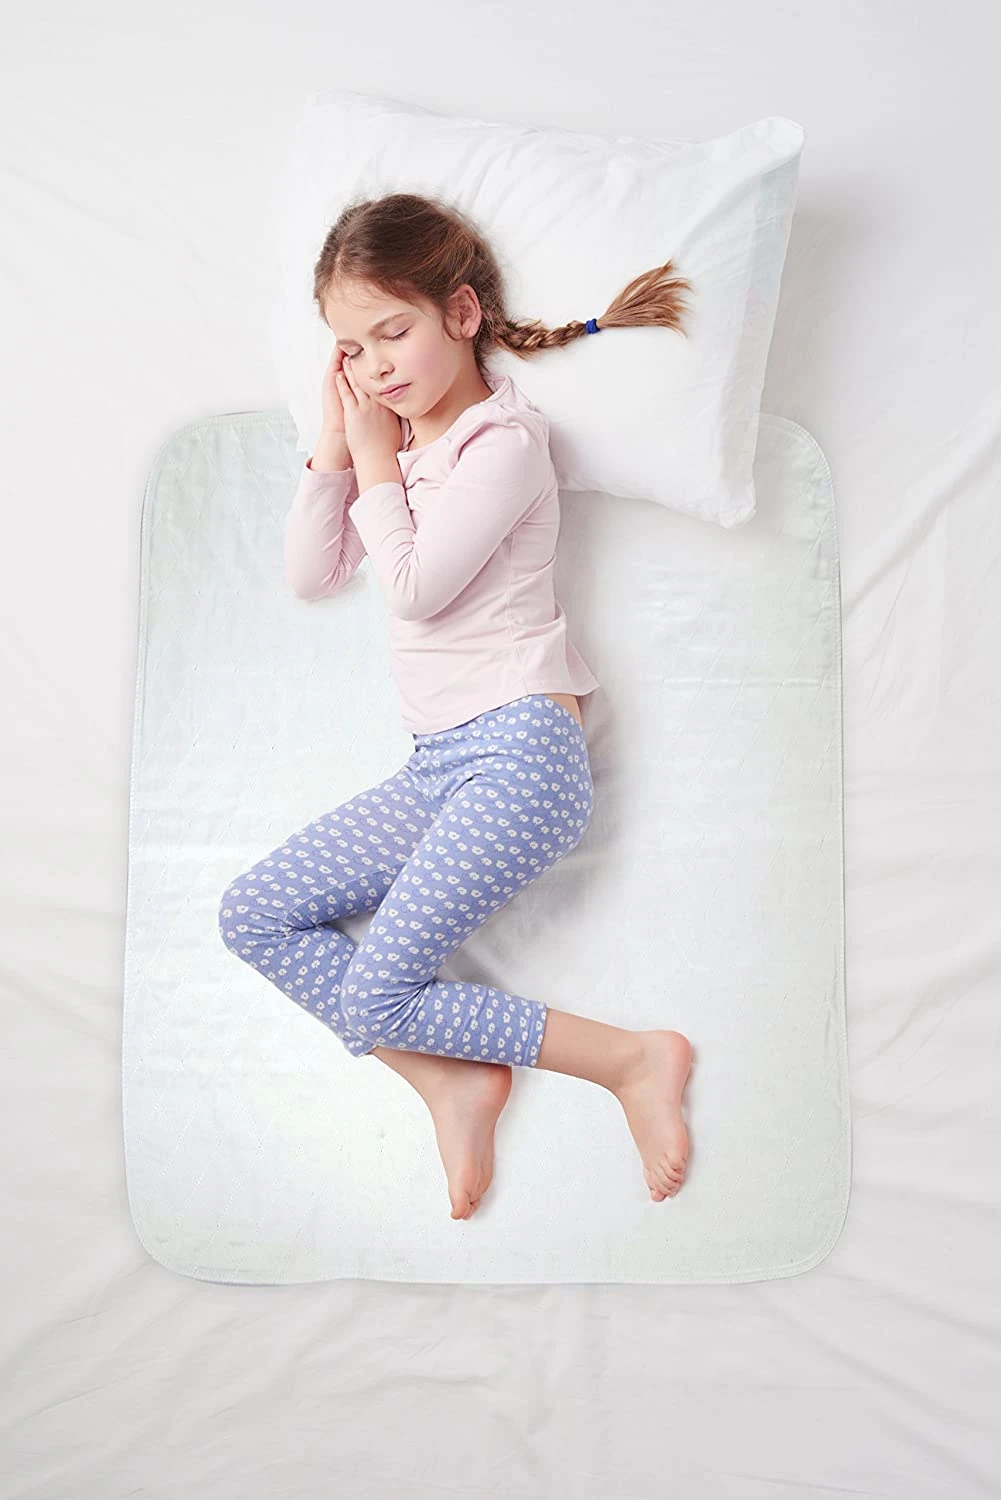 Manufacturer Texpro 2021 New Waterproof Mattress Pad for Children or Adults with Incontinence